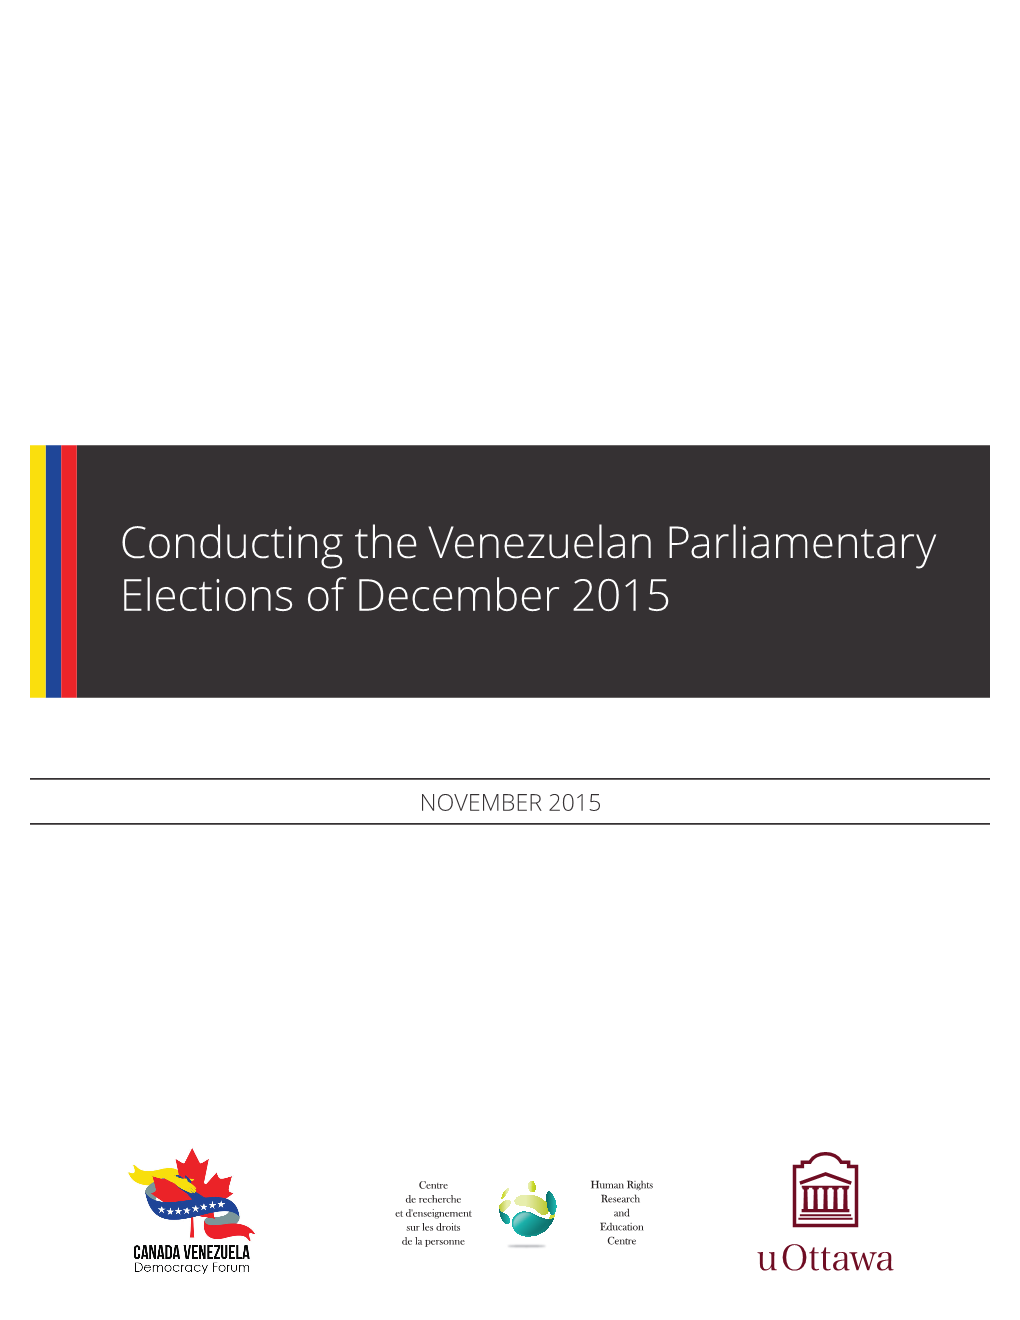 Conducting the Venezuelan Parliamentary Elections of December 2015